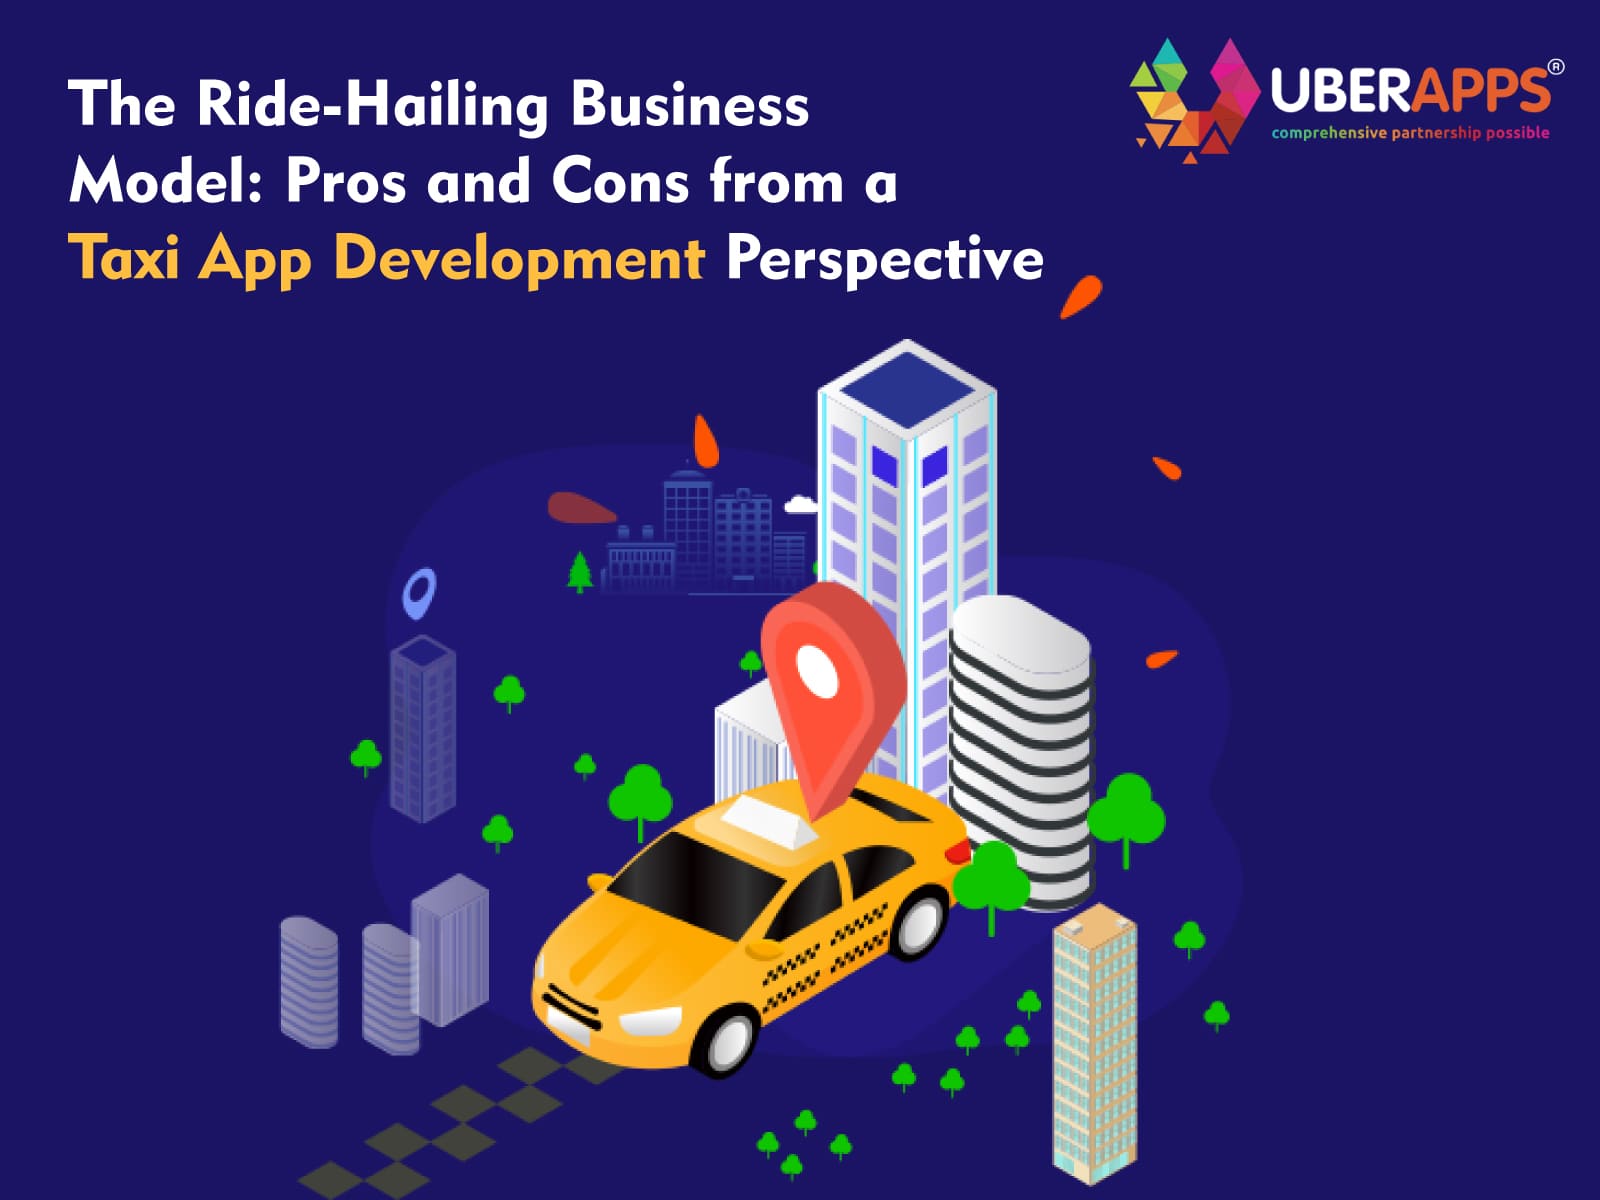 The Ride-Hailing Business Model: Pros and Cons from a Taxi App Development Perspective